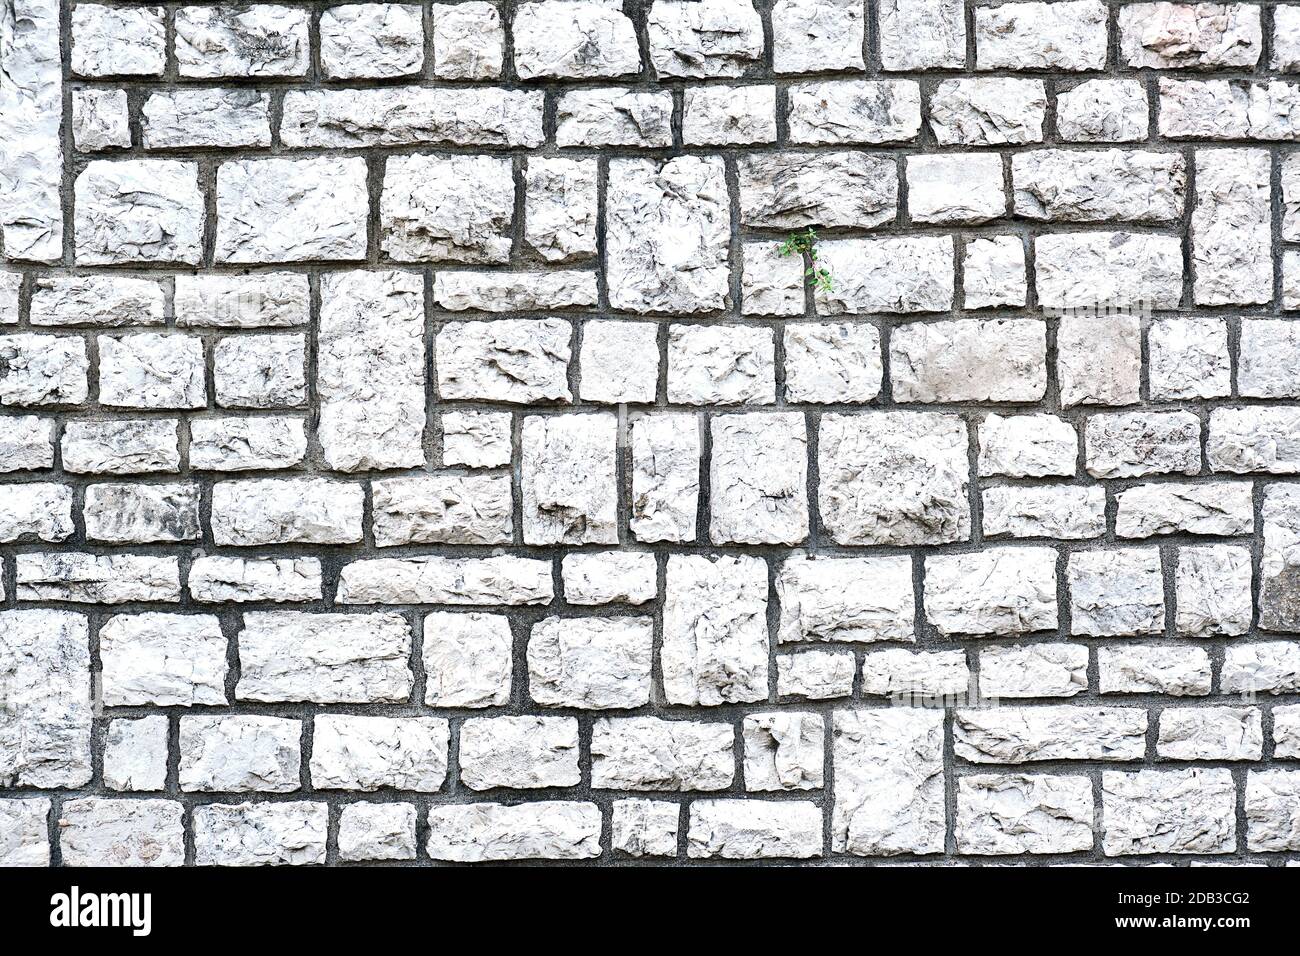 Background from a wall made of block shaped natural stones Stock Photo